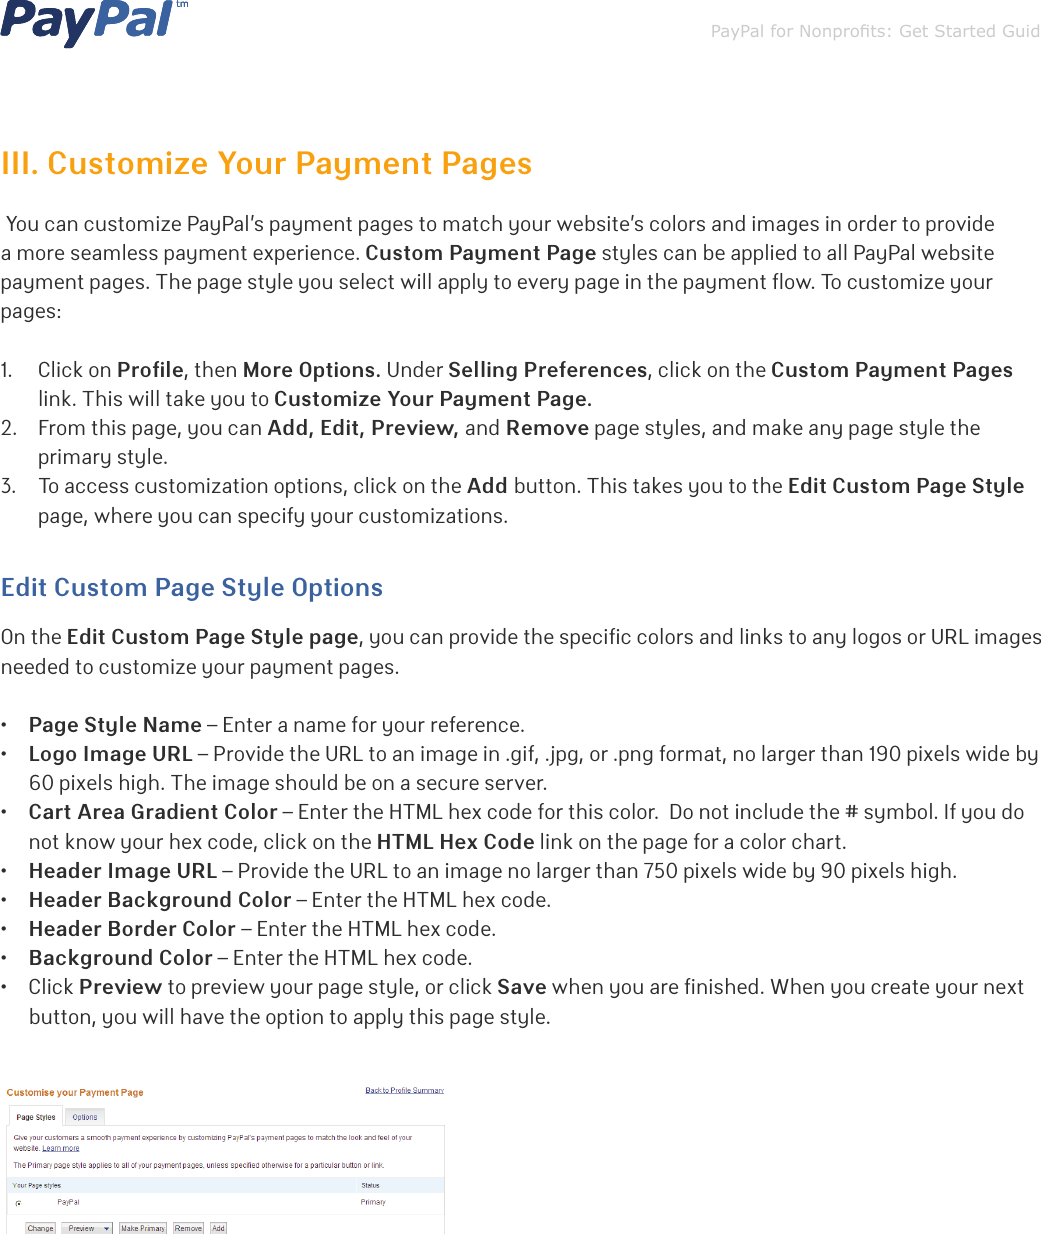 Page 7 of 8 - Paypal Paypal-Nonprofits-2012-Getting-Started-Guide-  Paypal-nonprofits-2012-getting-started-guide